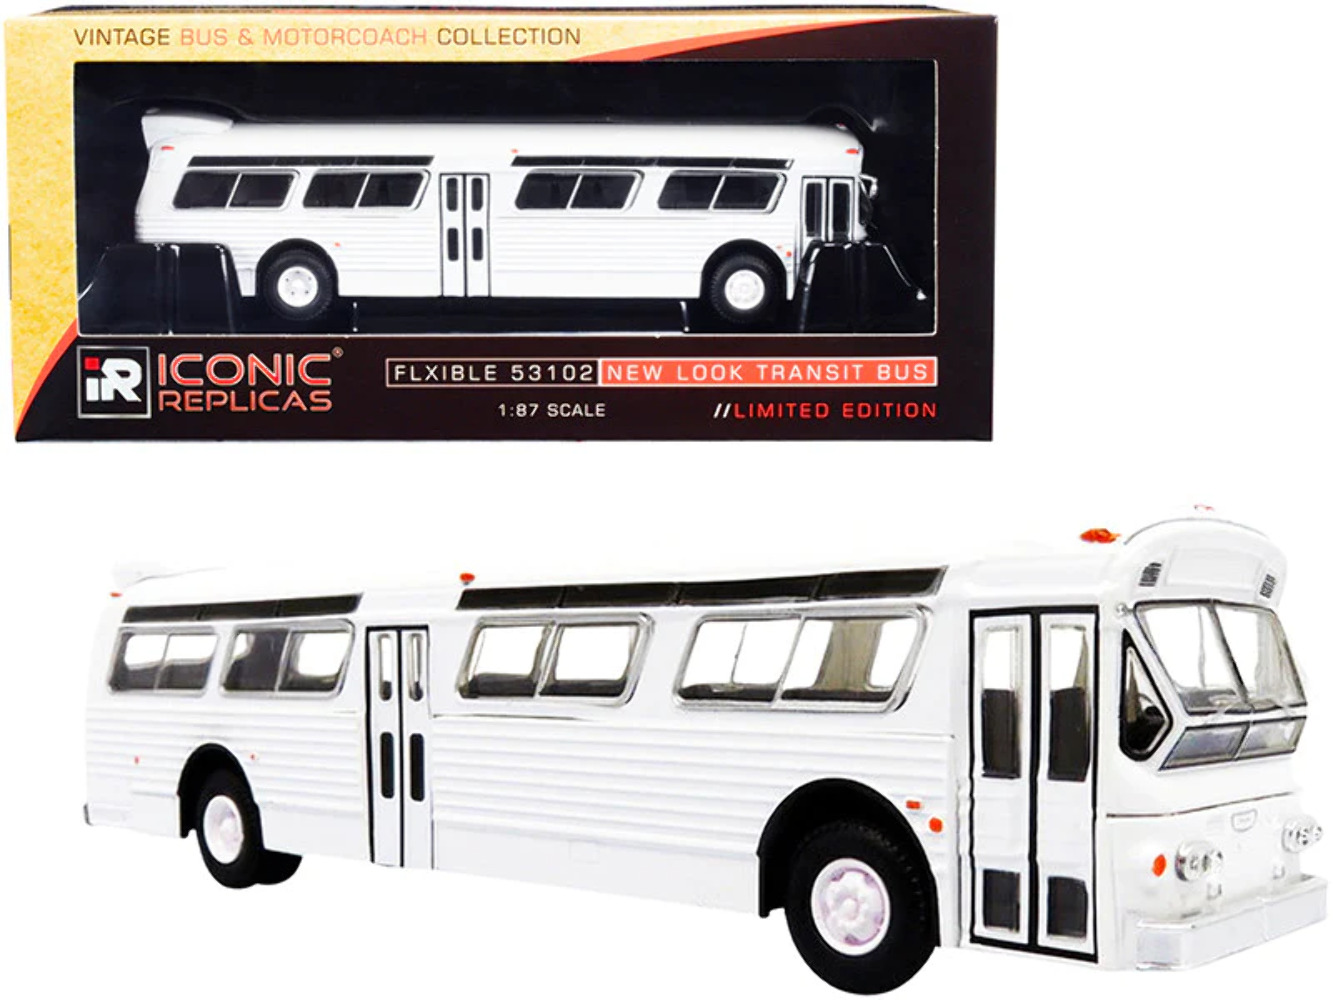 Flxible 53102 Transit Bus with A/C Unit Blank White \Vintage Bus & Motorcoach Co